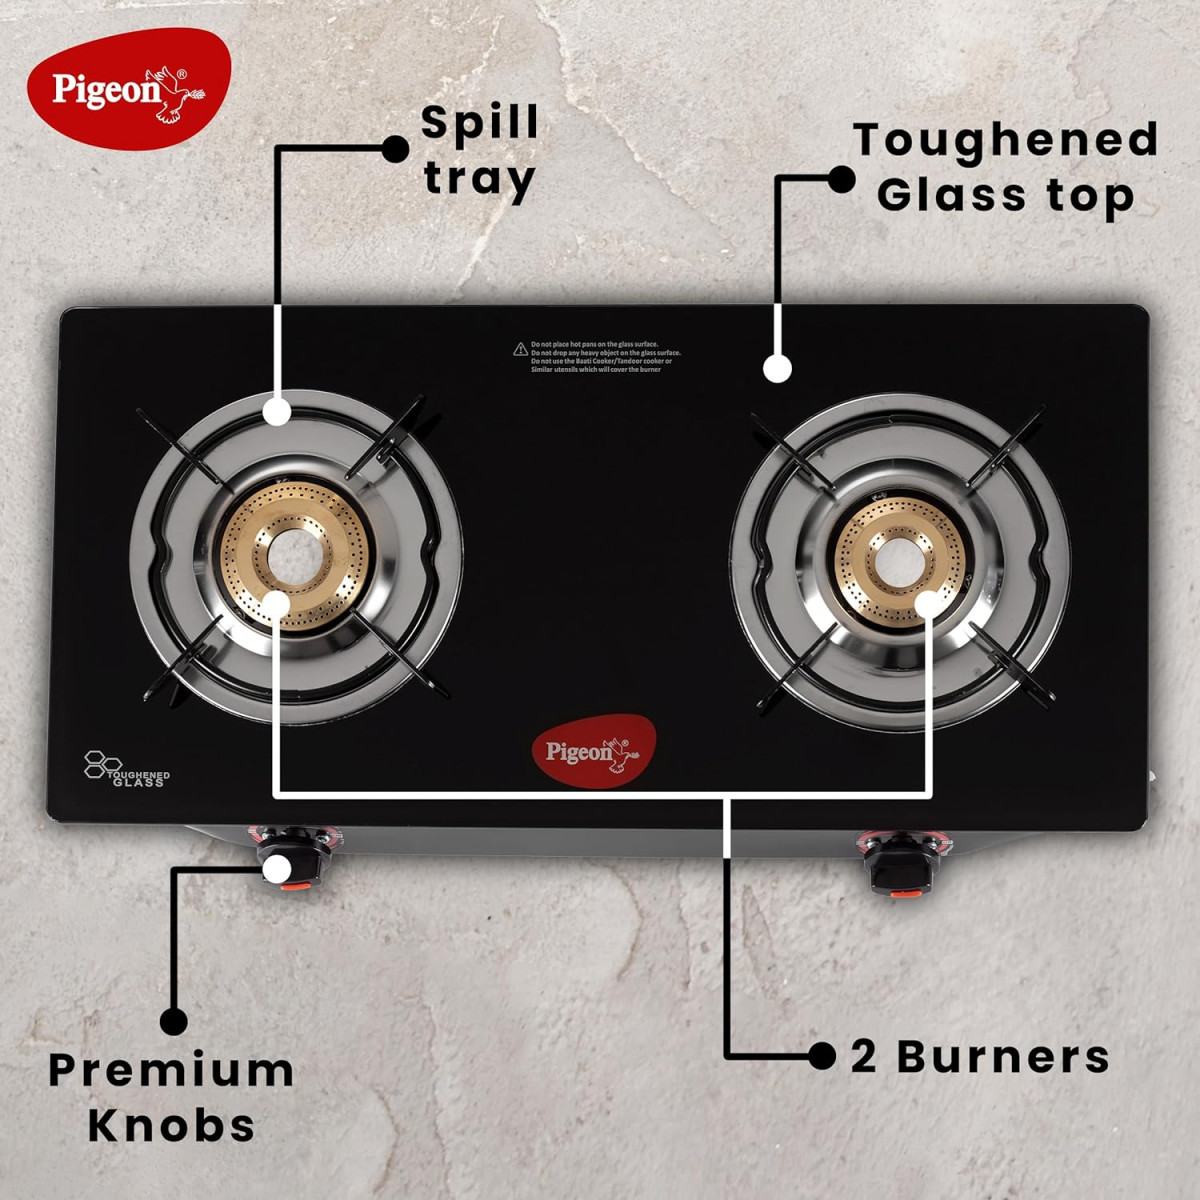 Pigeon Aster Gas Stove 2 Burner with High Powered Brass Burner Gas Cooktop with Glass Top and Powder Coated Body black standard 14266